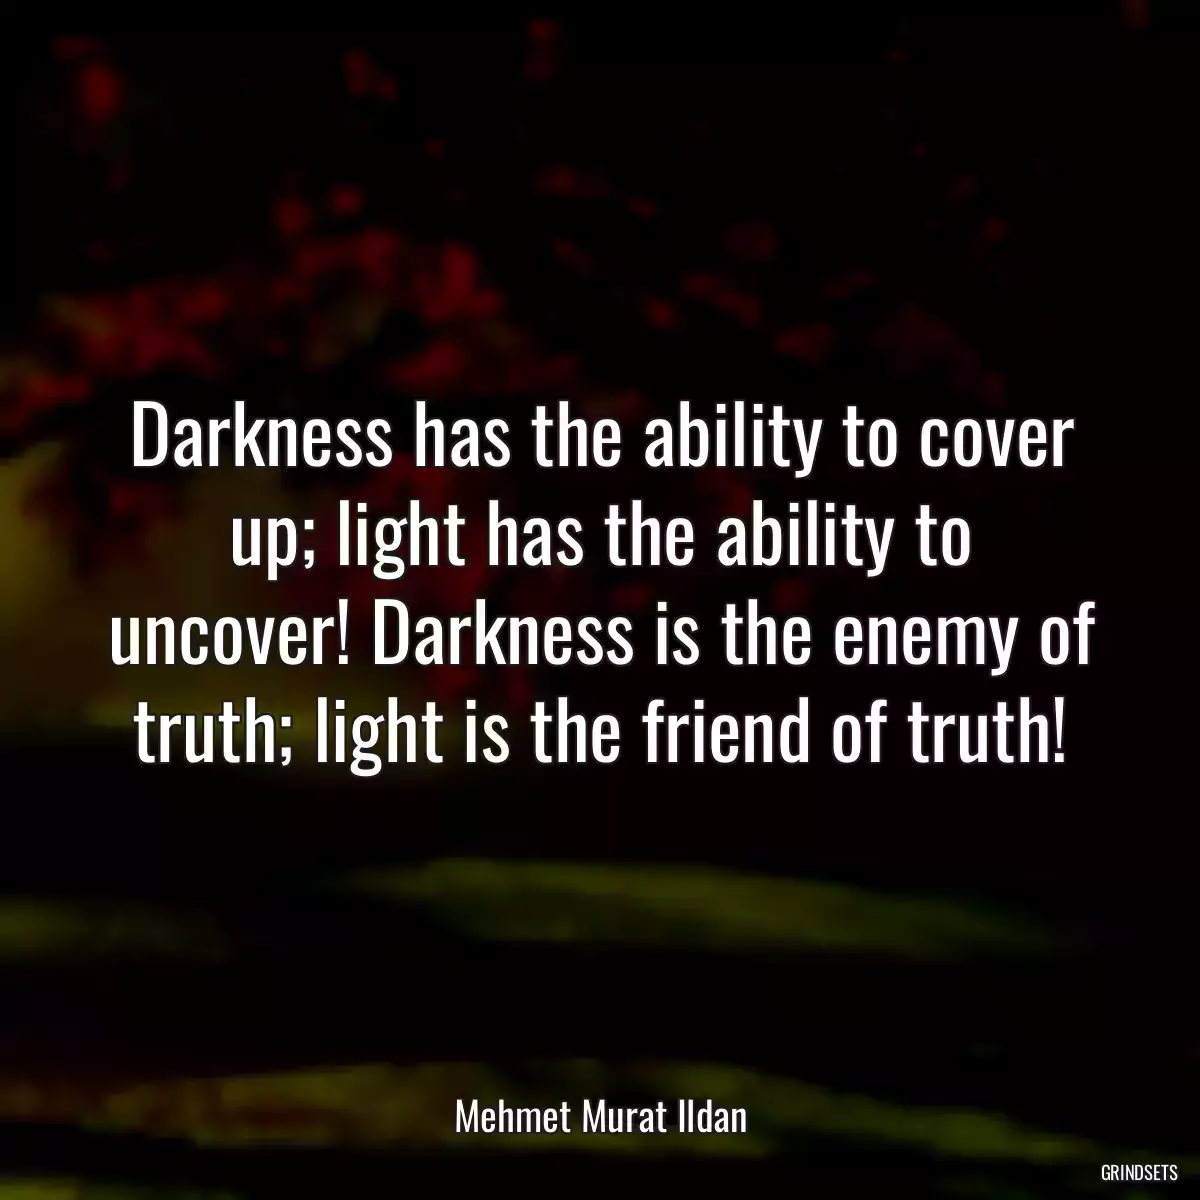 Darkness has the ability to cover up; light has the ability to uncover! Darkness is the enemy of truth; light is the friend of truth!